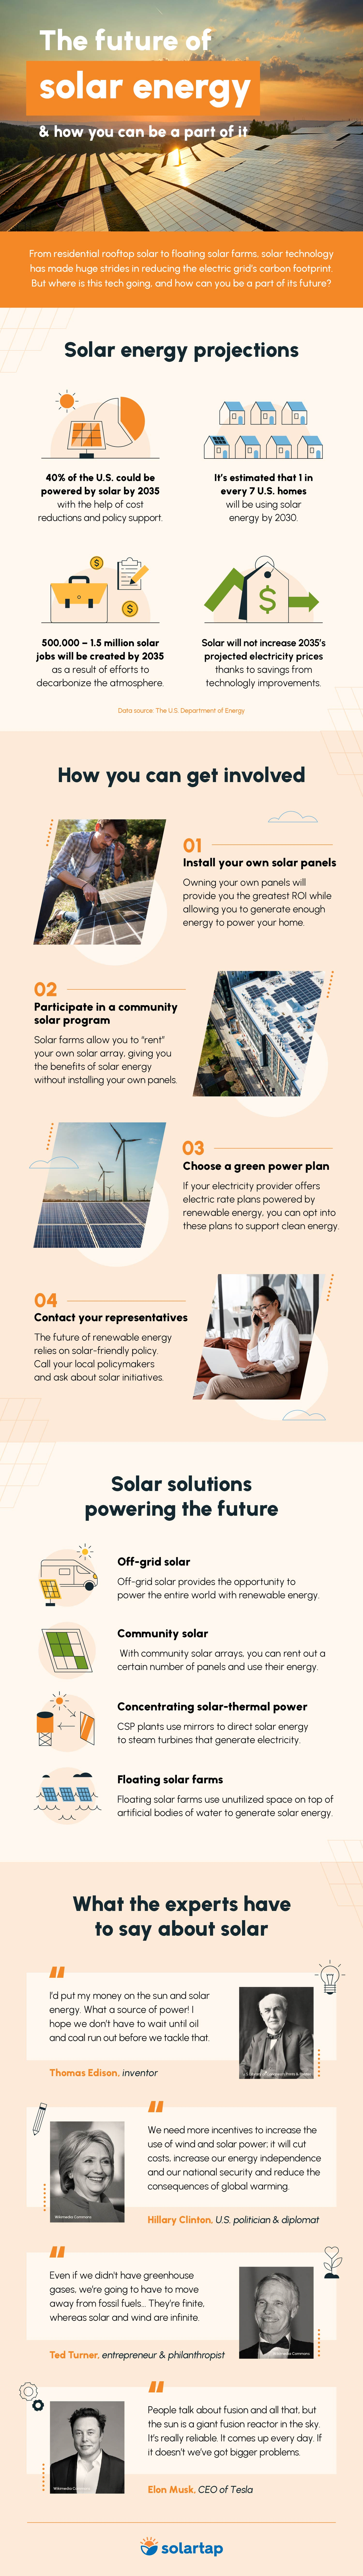 An infographic about the future of solar, including statistics and how readers can get involved